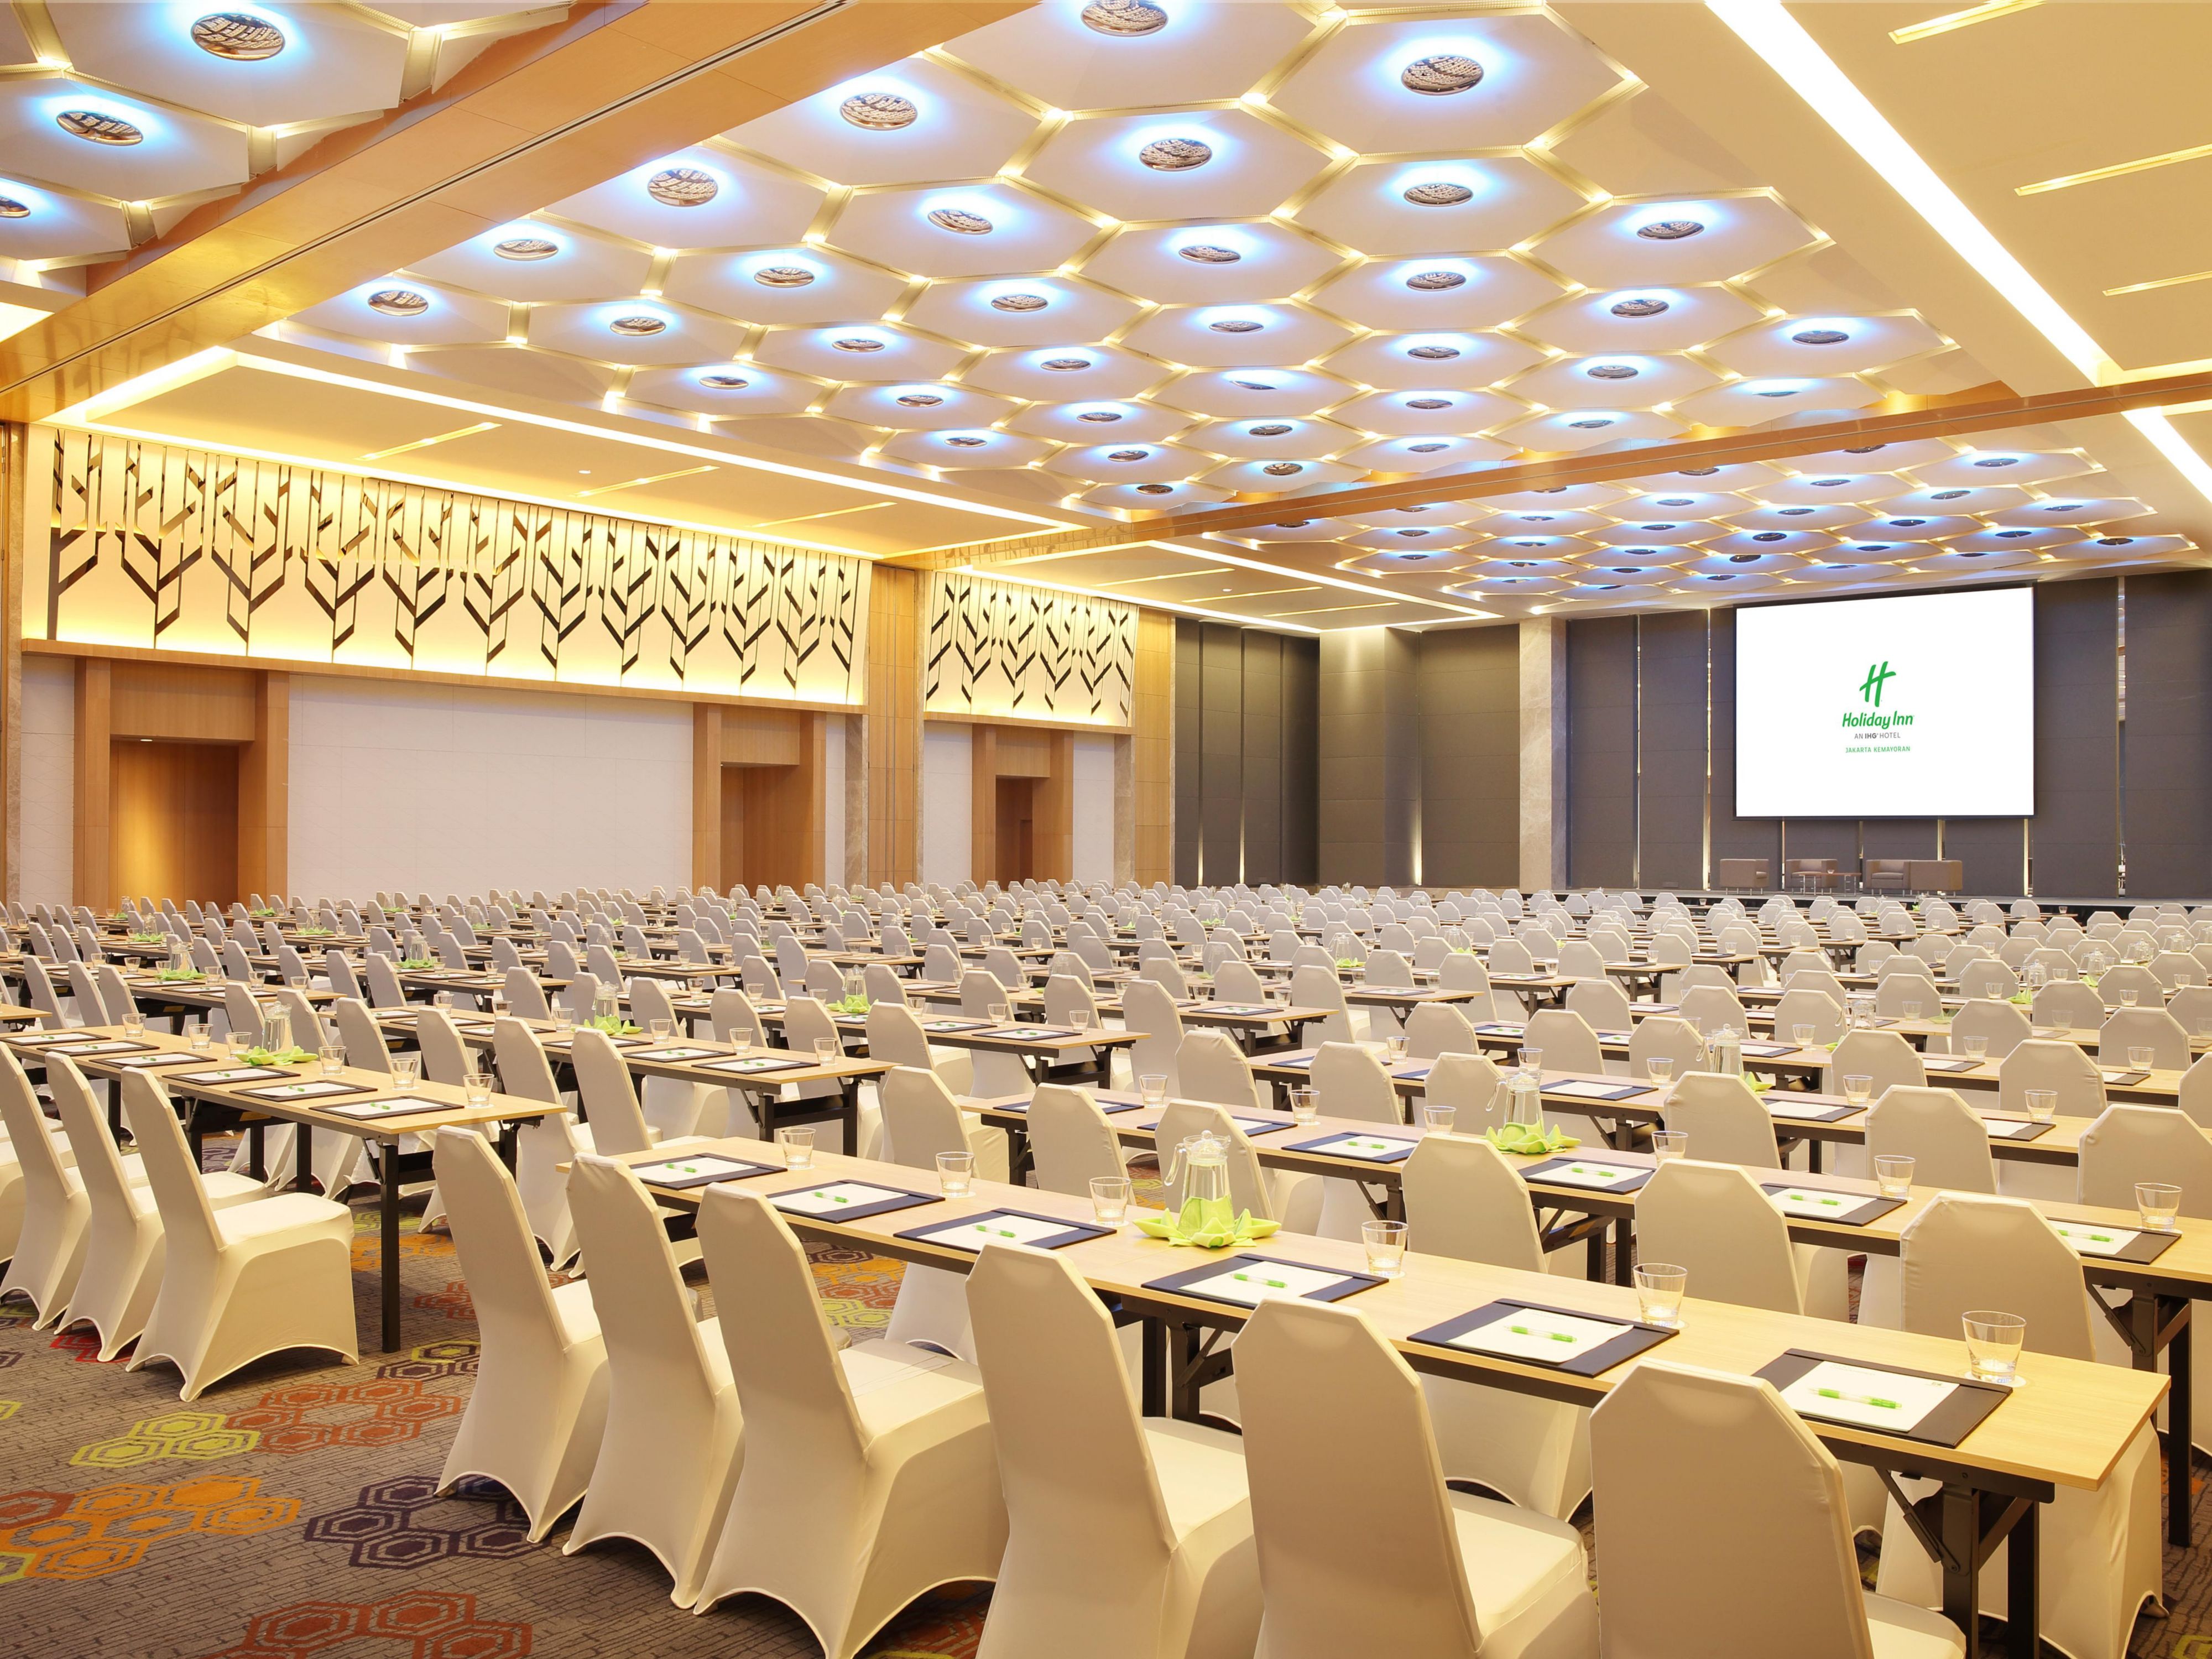 Our contemporary pillarless Grand Ballroom with a spacious foyer for your pre-cocktails along with our 6 functions/meeting rooms with natural daylight helps you stay focused on your goals, and we take care of your meetings from start to end.